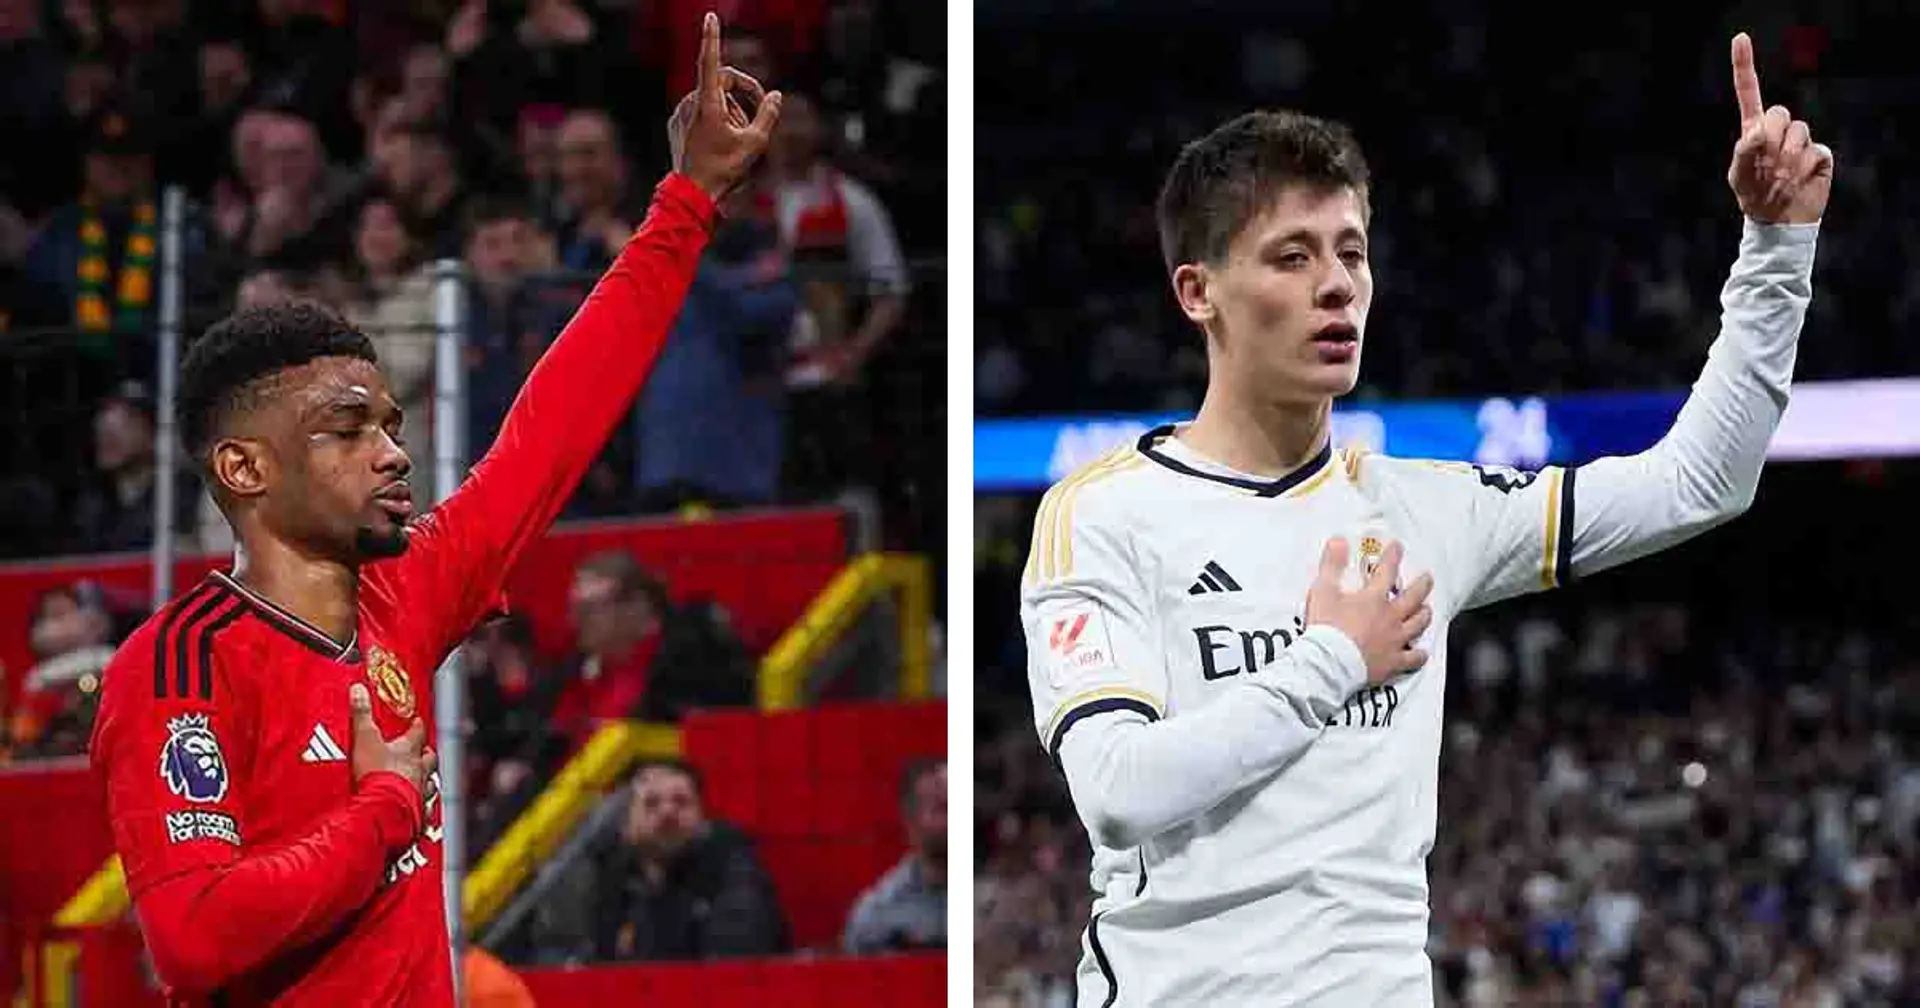 Explained: why Amad Diallo replicated Arda Guler's celebration after scoring first PL goal